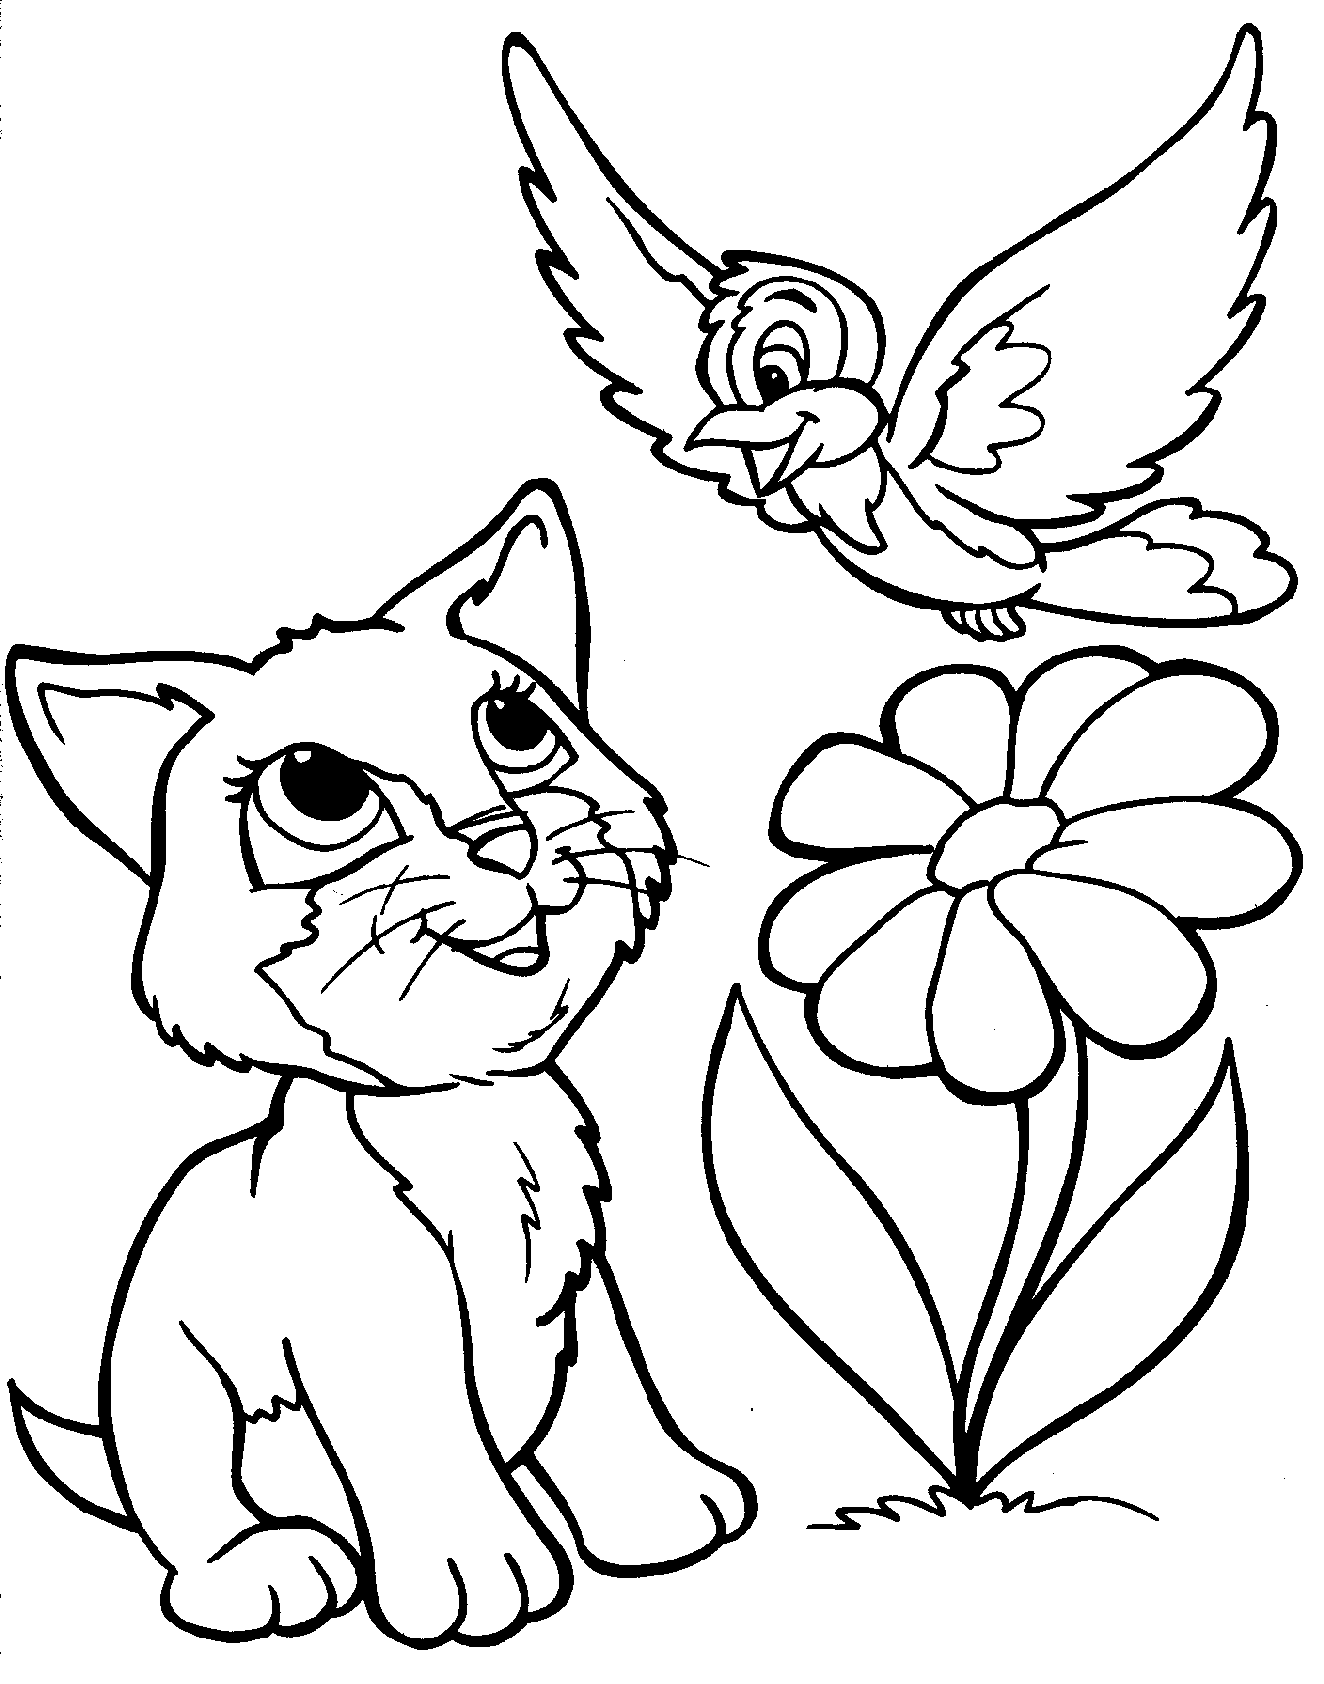 free kitten coloring pages cute kitten coloring page free printable coloring pages coloring free kitten pages 